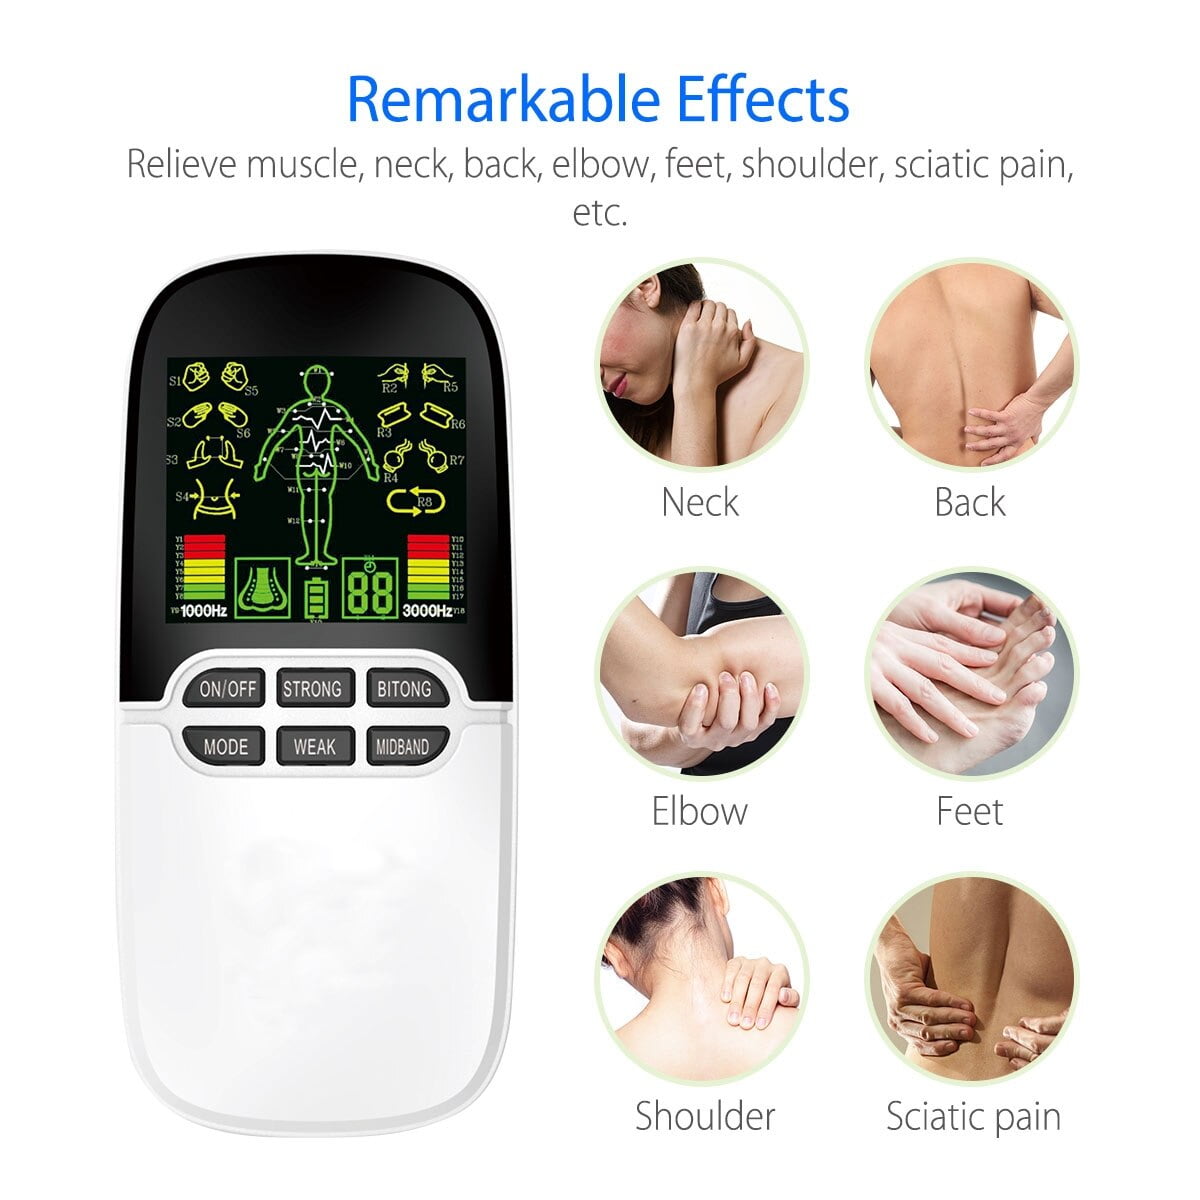 Dropship Electric Muscle Stimulator Dual Channels Pulse Massager Pain Relief  Therapy Tens Device With Electrode Pads Wires to Sell Online at a Lower  Price